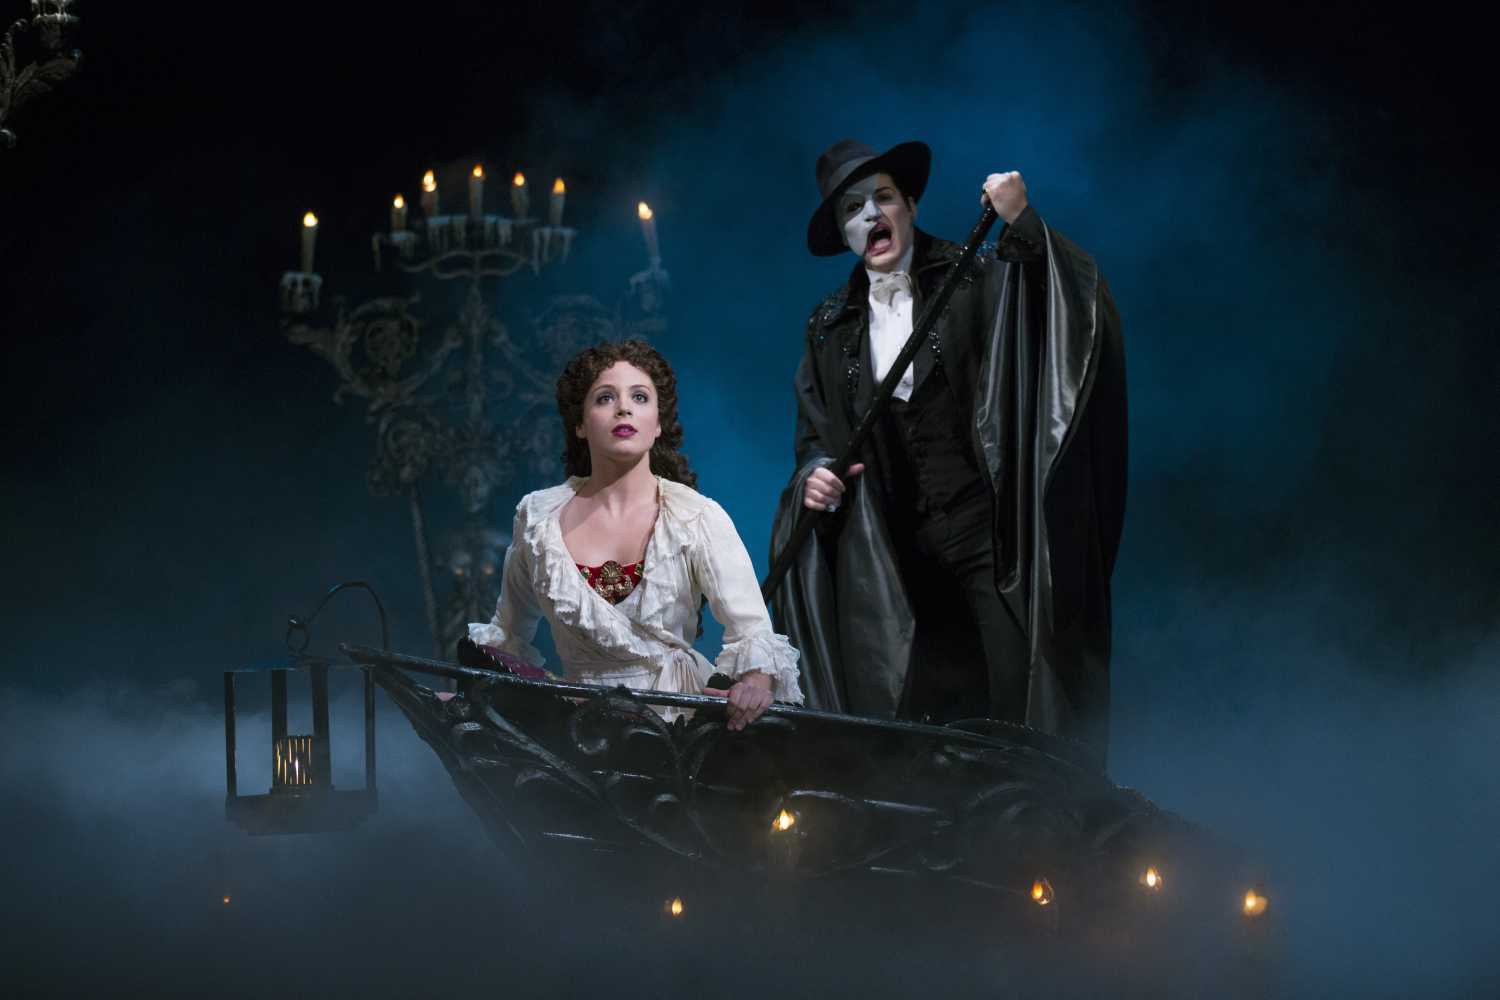 Watch Phantom of the Opera for free today | Time Out Dubai